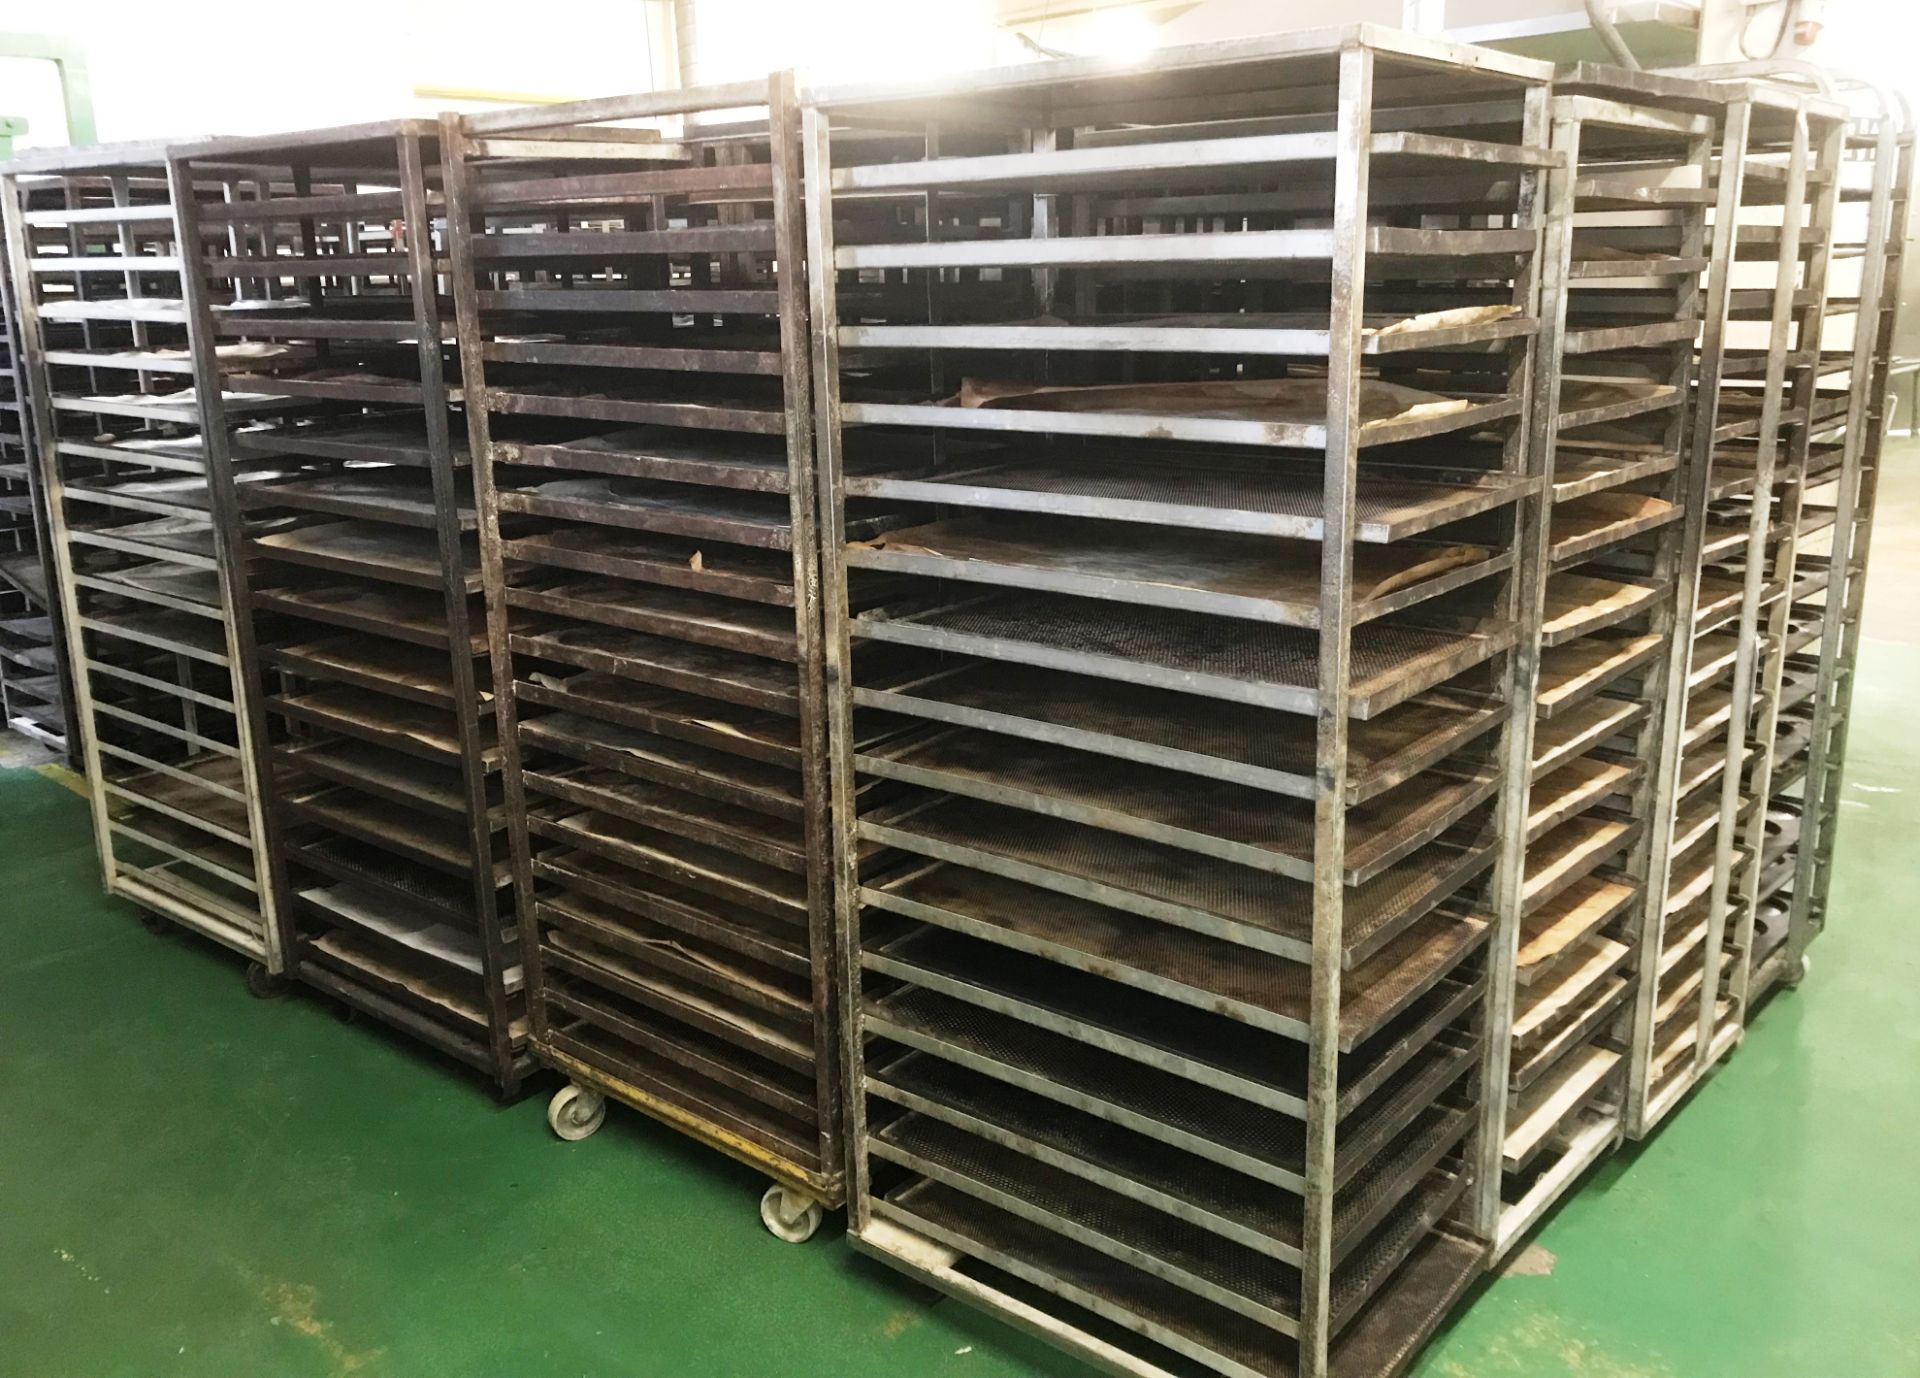 16 x Various Bakery Racks & Trays - As Pictured - Image 3 of 3